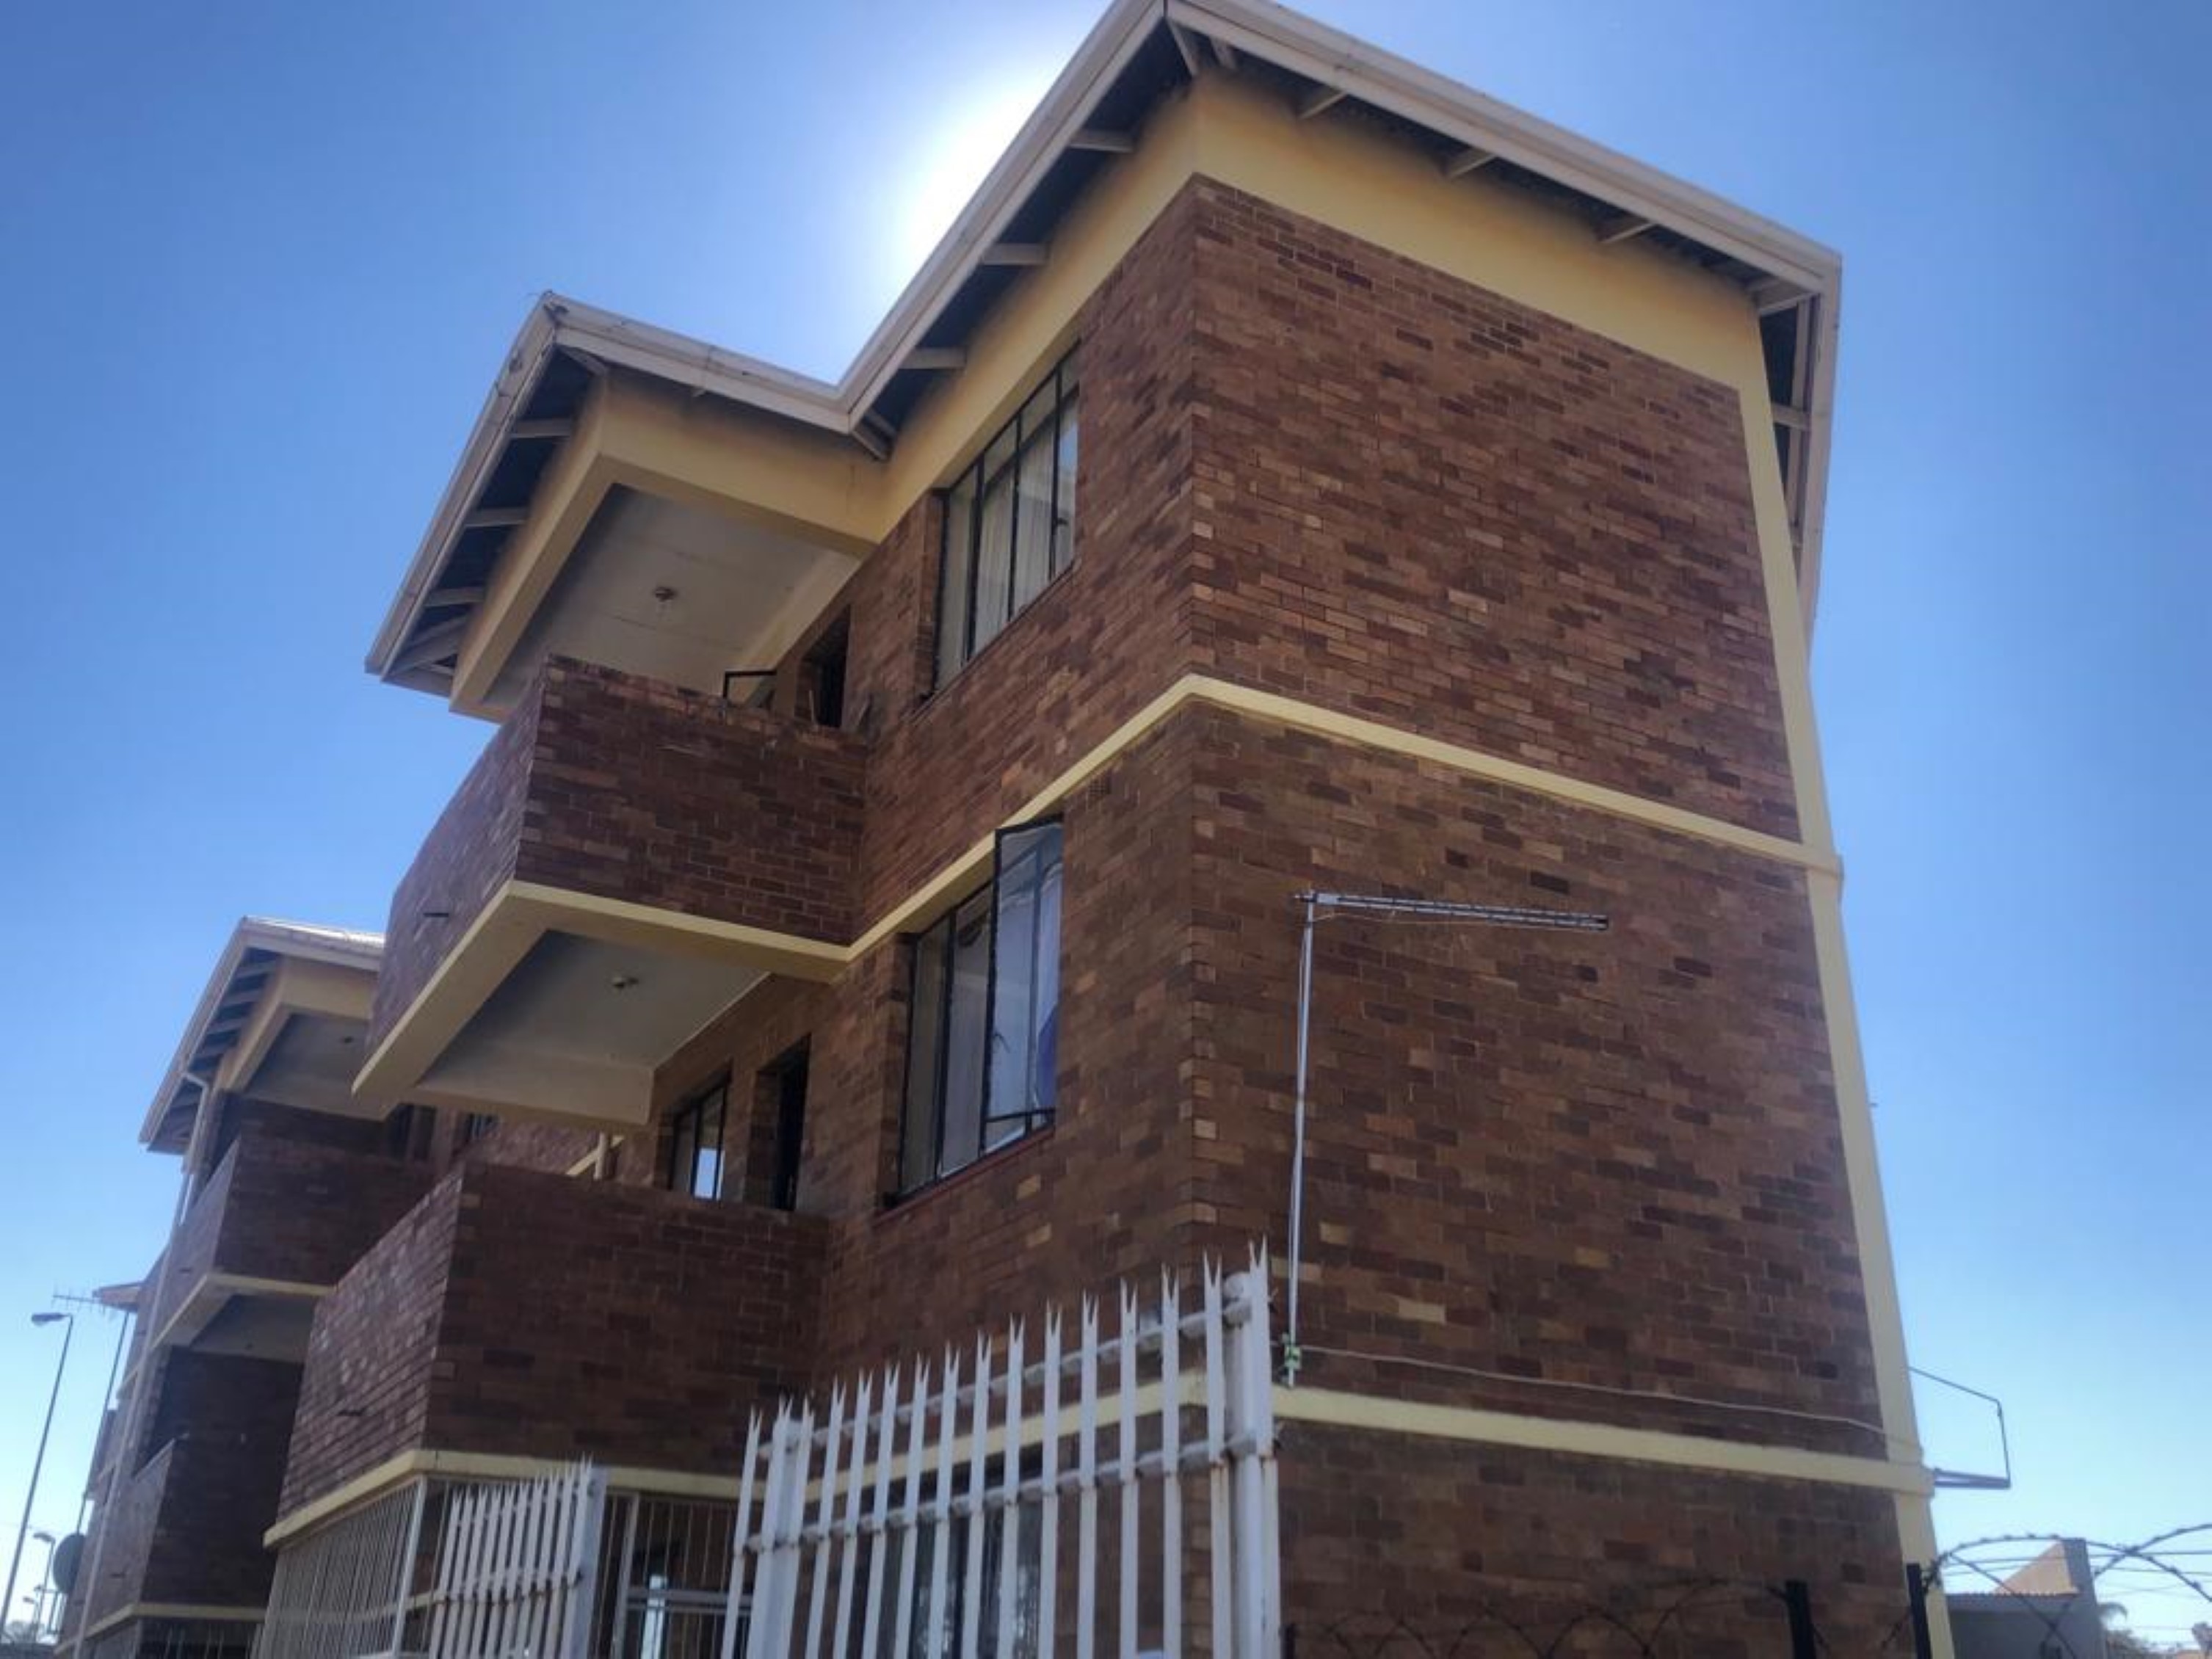 3 Bedroomed Flat in Theo's Court (pty)ltd